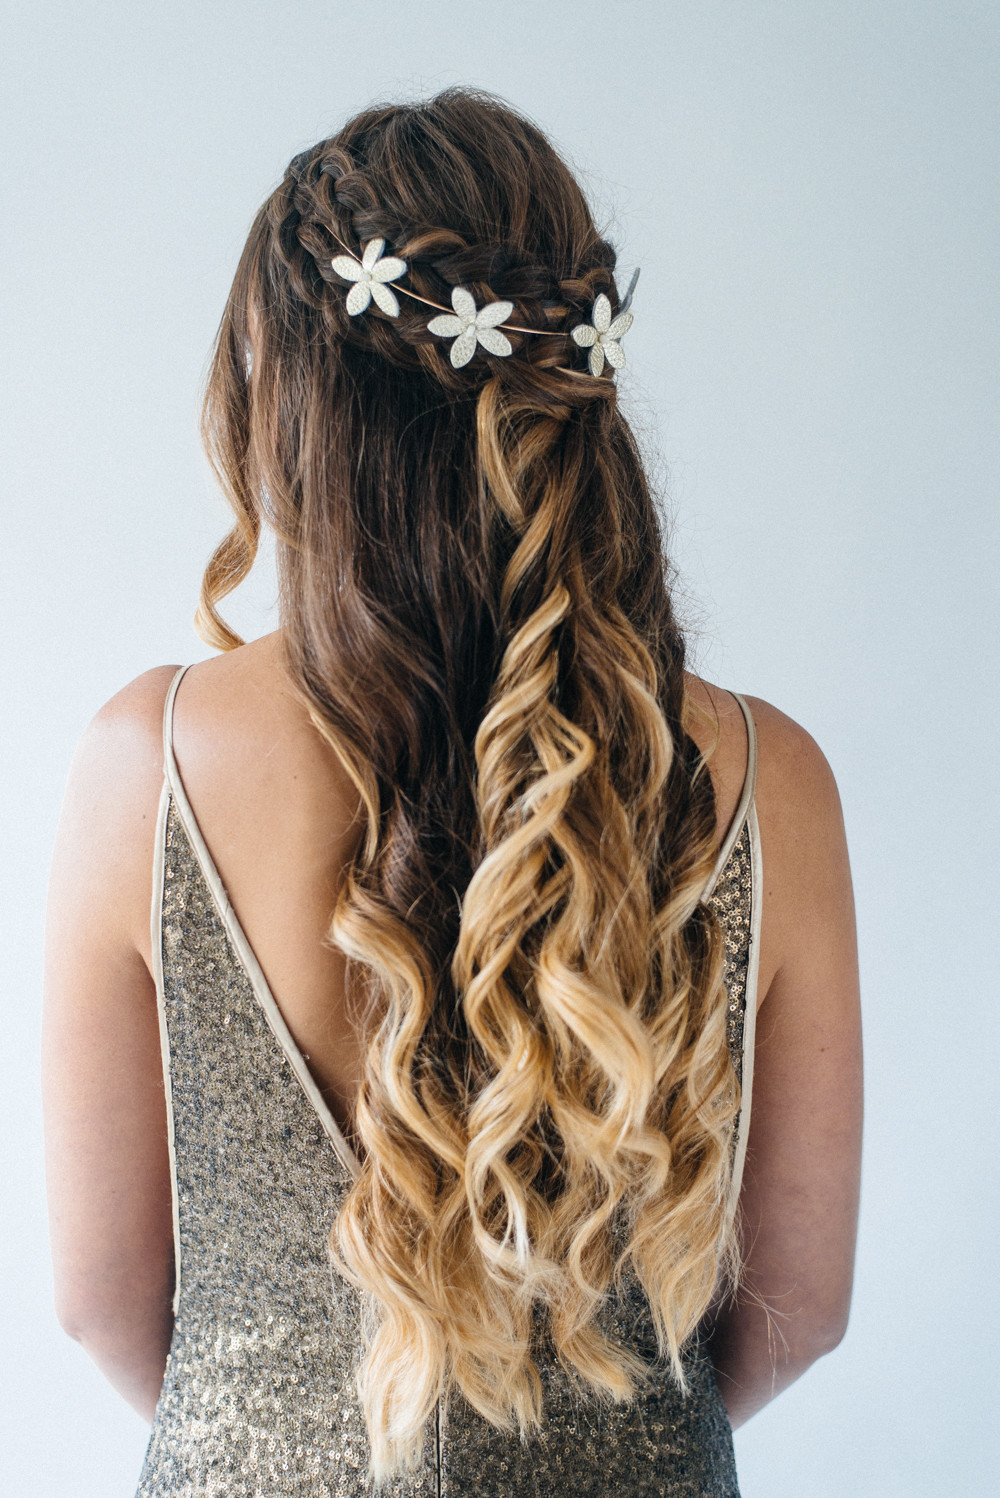 Bridesmaid Hairstyles Half Up Half Down
 Inspiration For Half Up Half Down Wedding Hair With